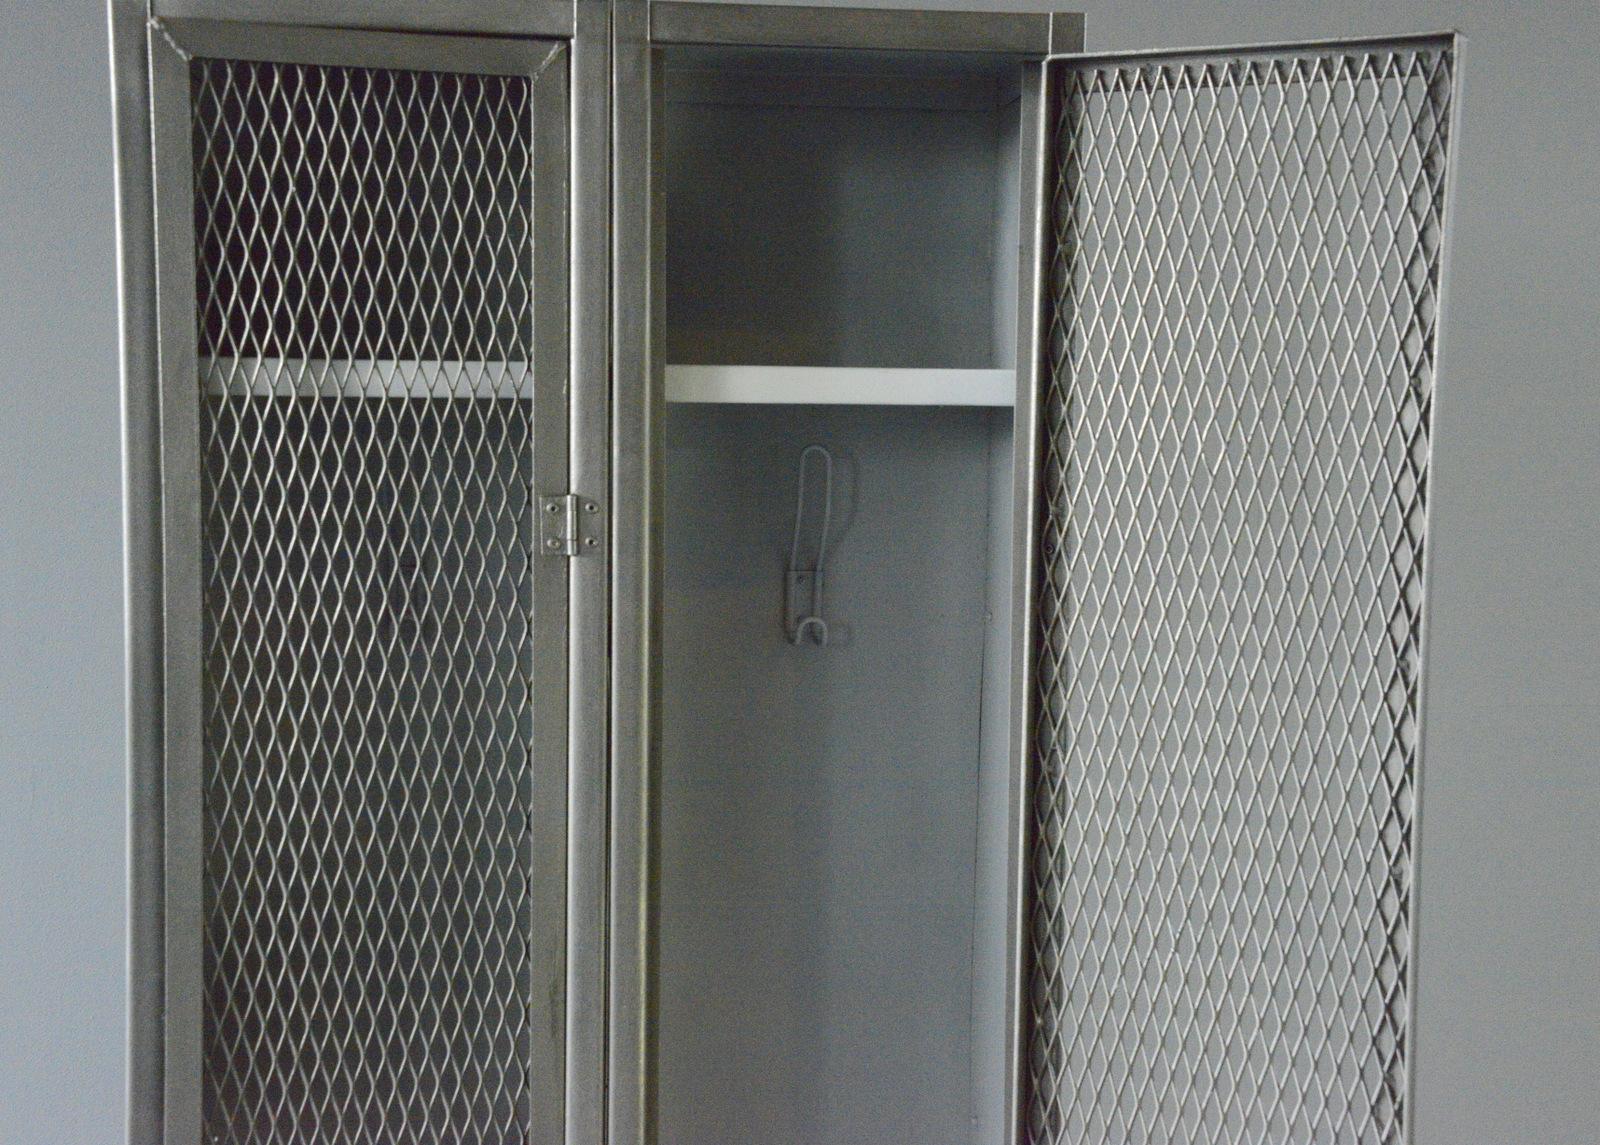 English Industrial Lockers circa 1940s For Sale 4